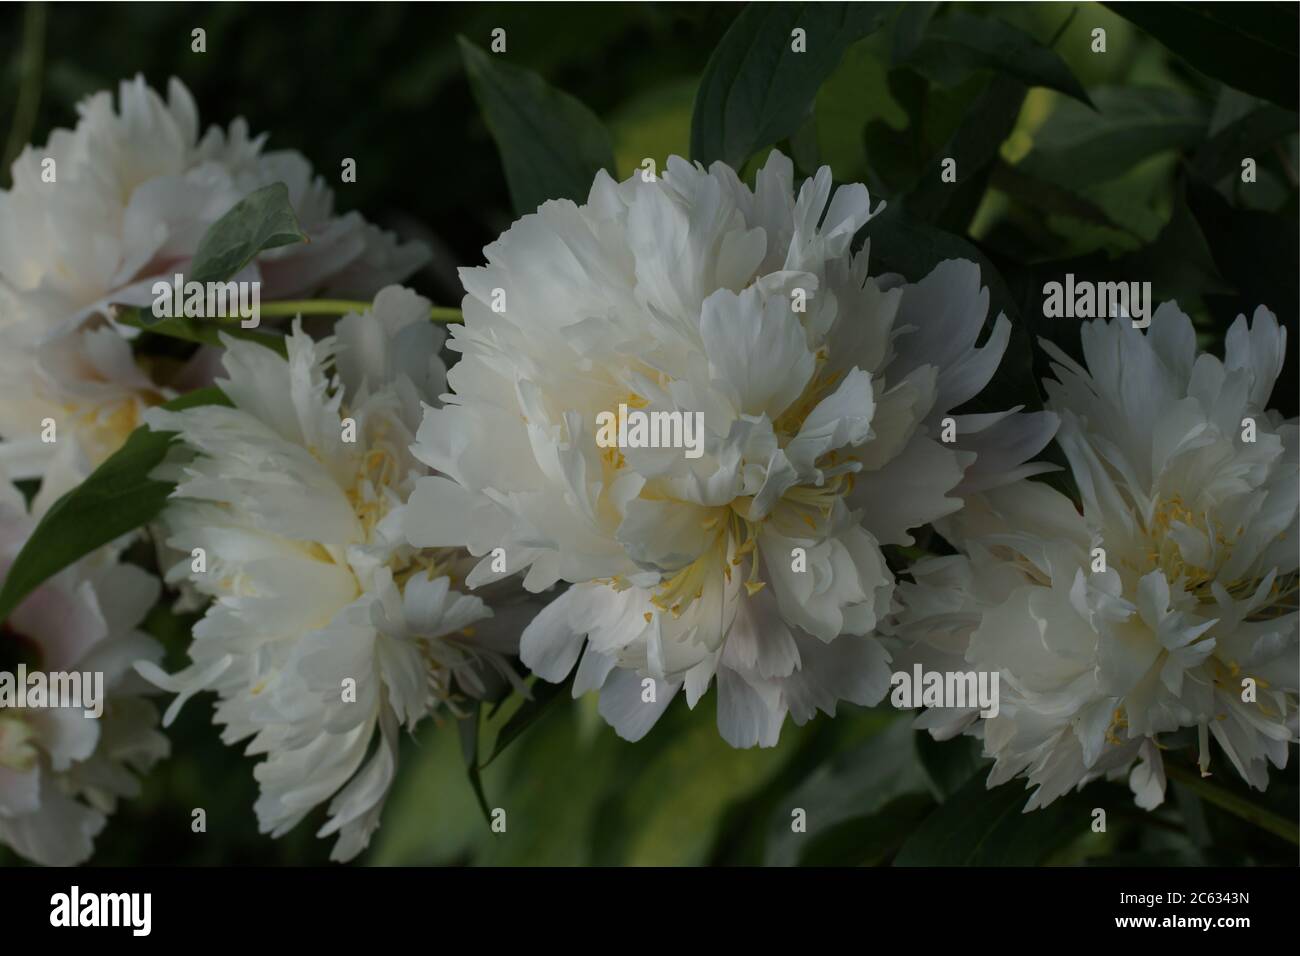 Peony of Chinese selection. Beautiful white double peonies grow in the garden. Many peonies. Stock Photo